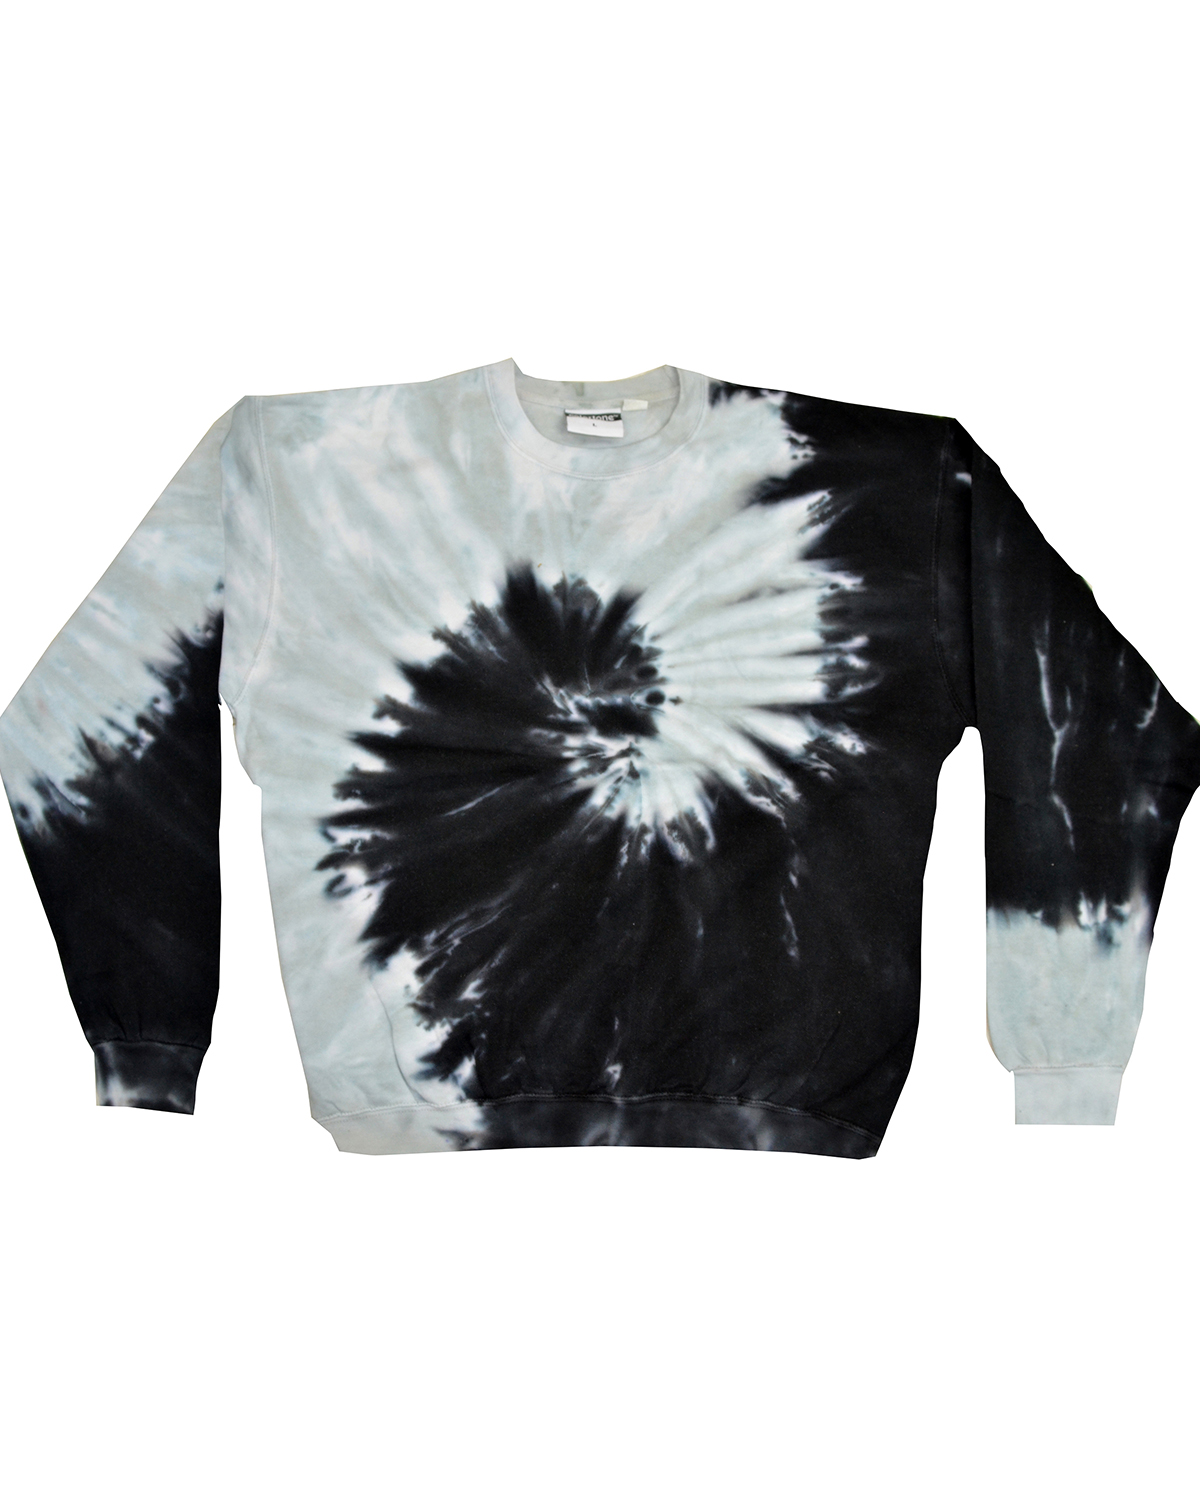 Tie-Dyed H8100 - Adult Tie-Dyed Fleece